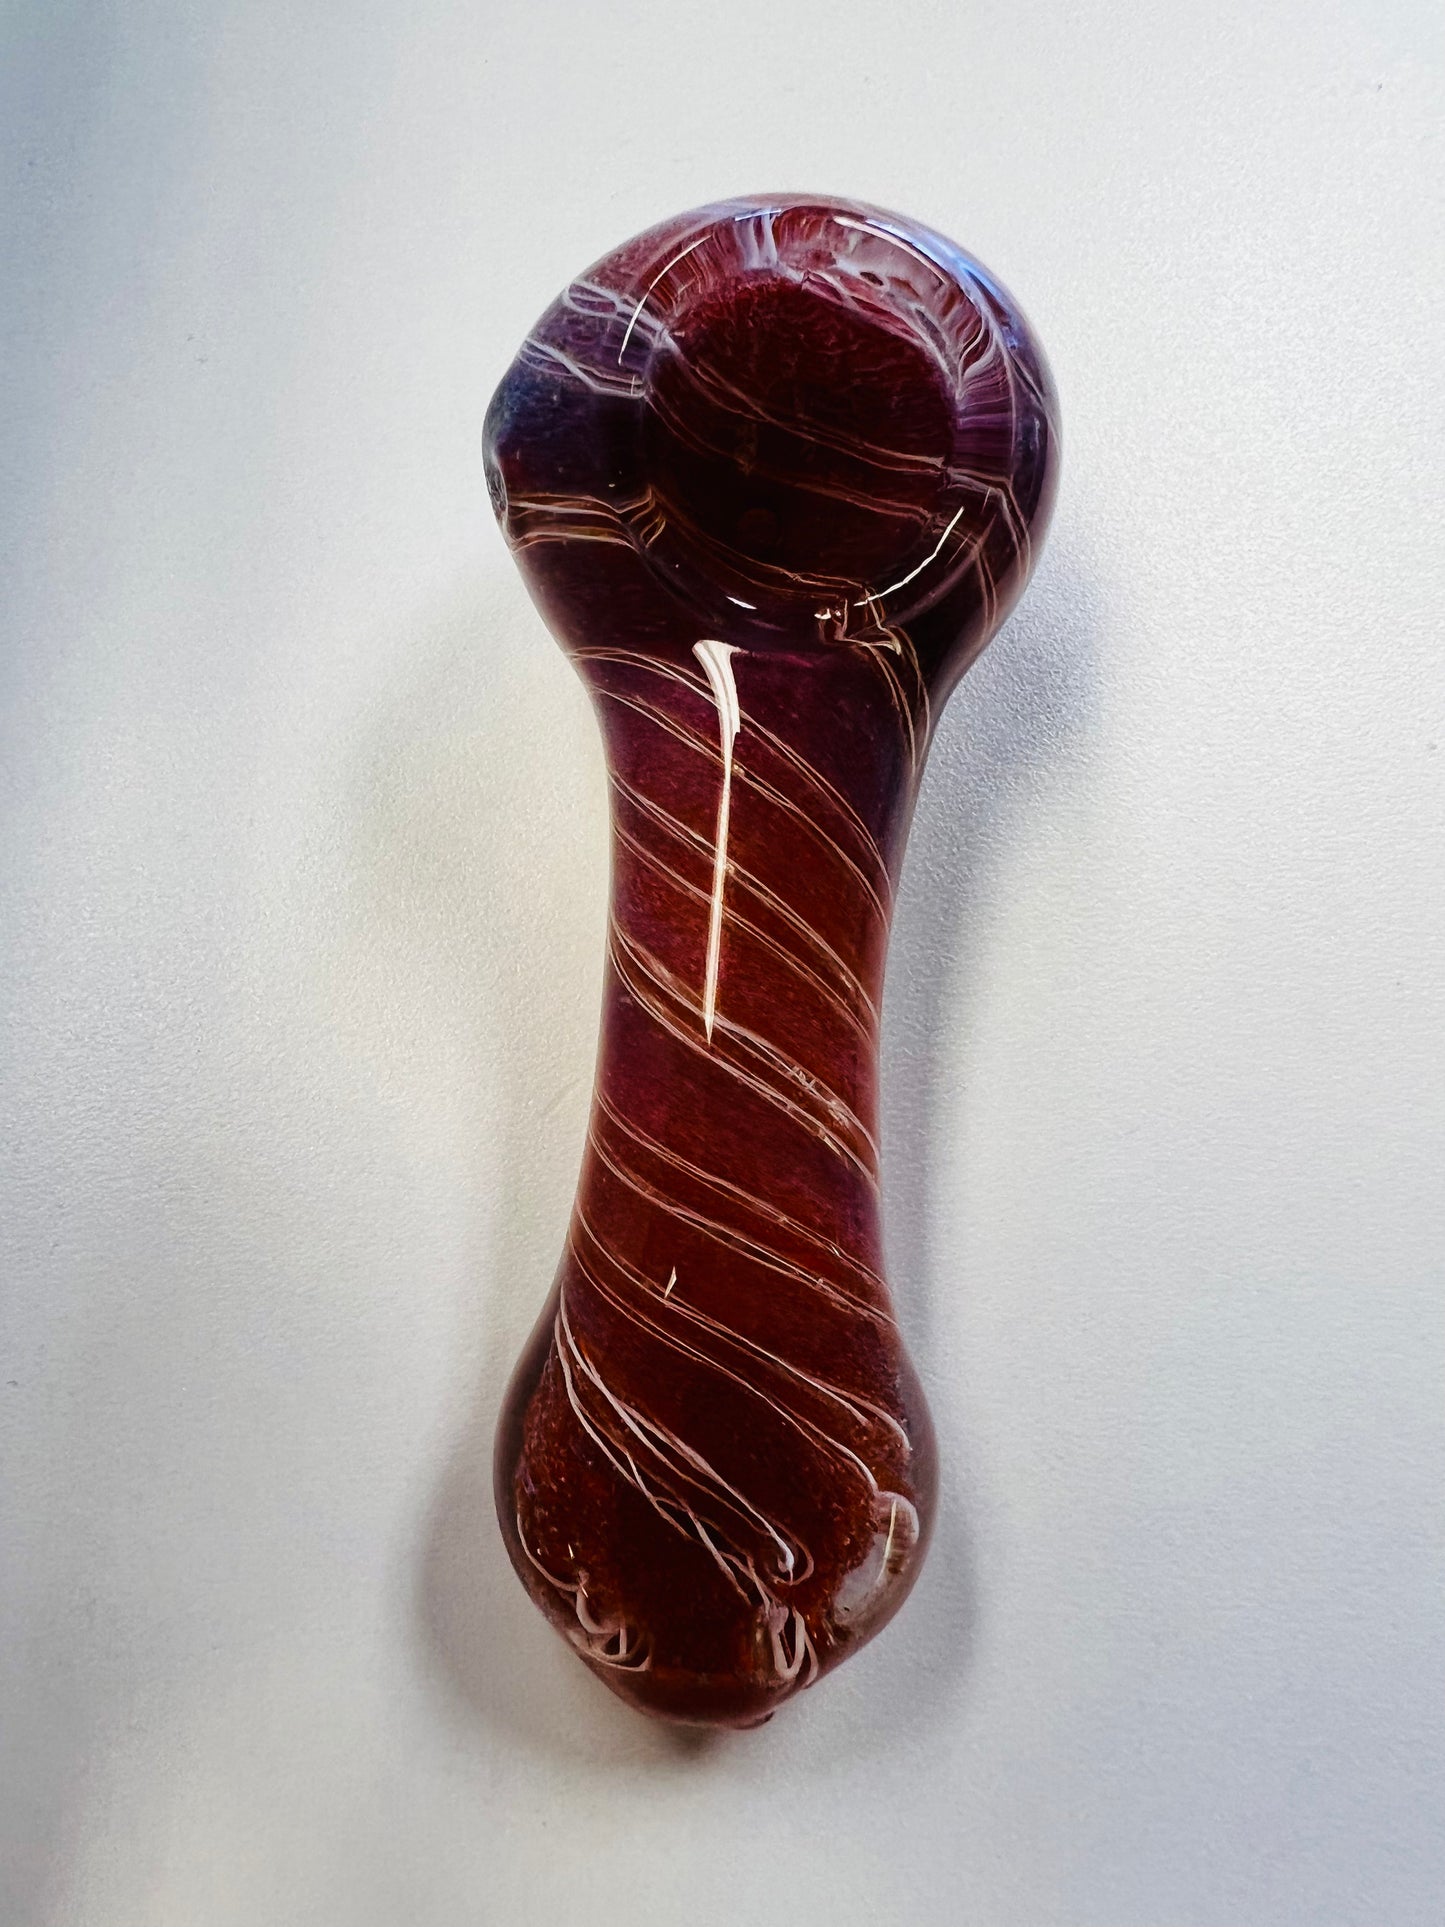 4 Inch Red Hand Pipe Heavy Glass yoga smokes yoga studio, delivery, delivery near me, yoga smokes smoke shop, find smoke shop, head shop near me, yoga studio, headshop, head shop, local smoke shop, psl, psl smoke shop, smoke shop, smokeshop, yoga, yoga studio, dispensary, local dispensary, smokeshop near me, port saint lucie, florida, port st lucie, lounge, life, highlife, love, stoned, highsociety. Yoga Smokes